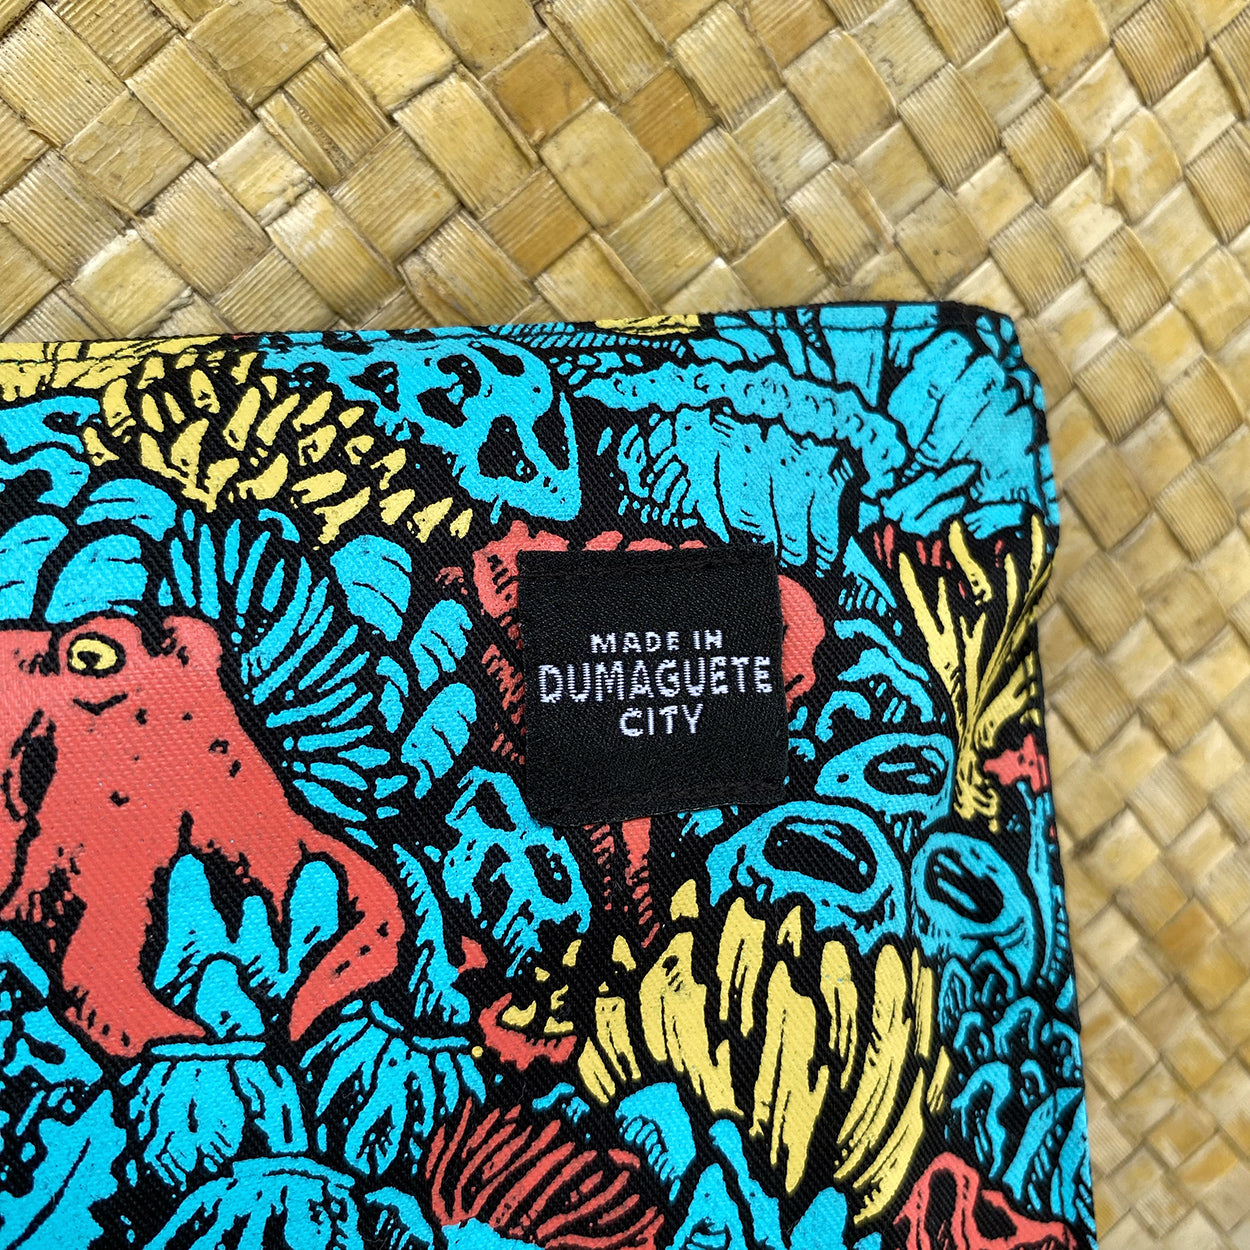 Angelo Delos Santos coral reef pattern underwater diver cosmetic bag with handle silk screen printing local made philippines gift souvenir buy support artist Dumaguete city Negros Oriental